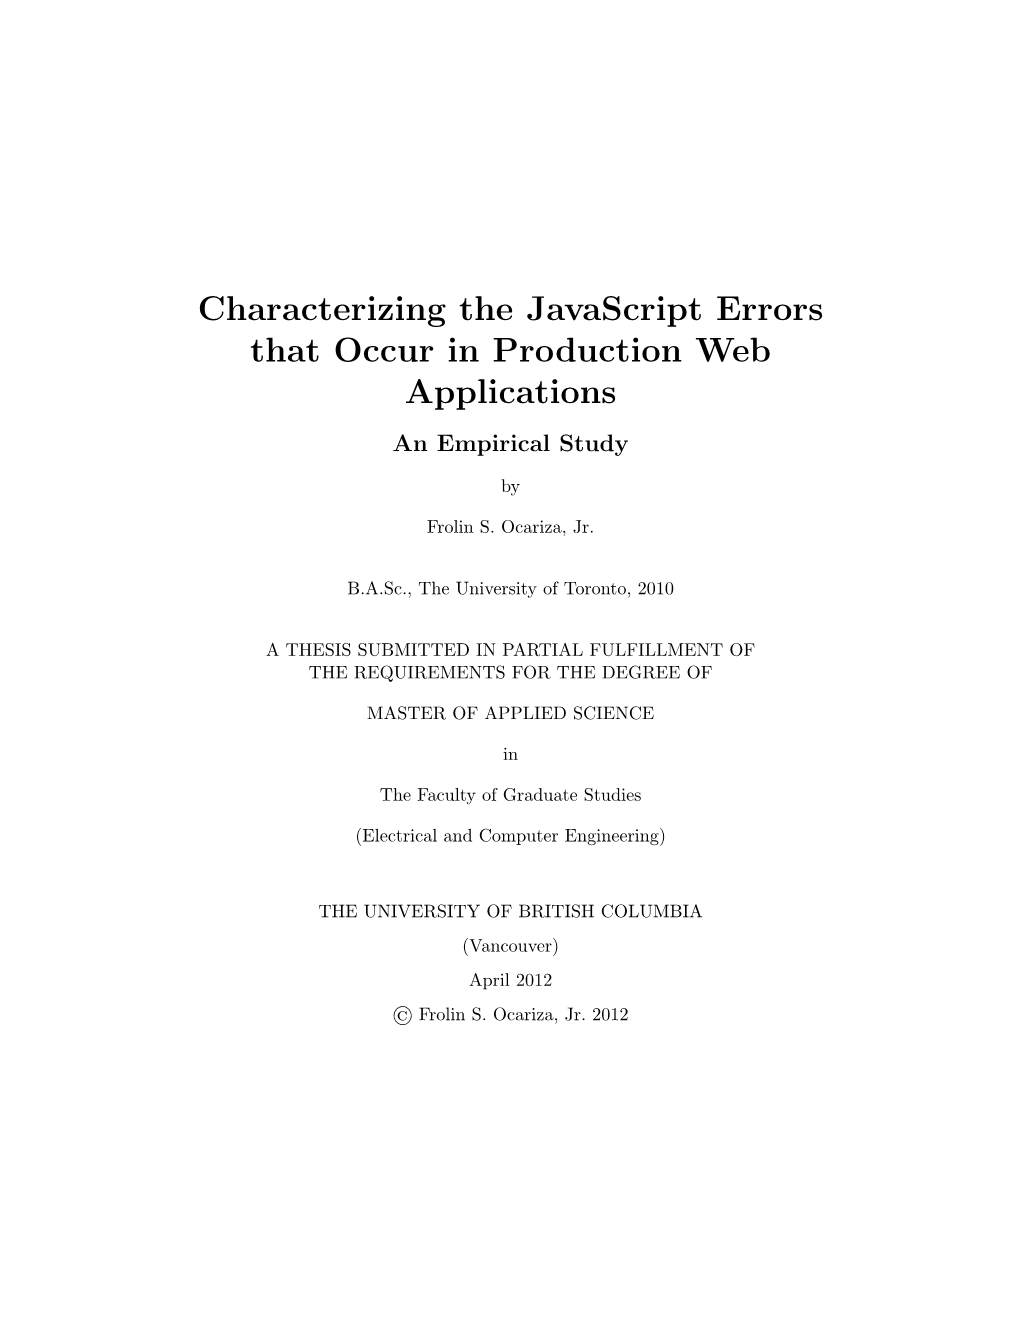 Characterizing the Javascript Errors That Occur in Production Web Applications an Empirical Study